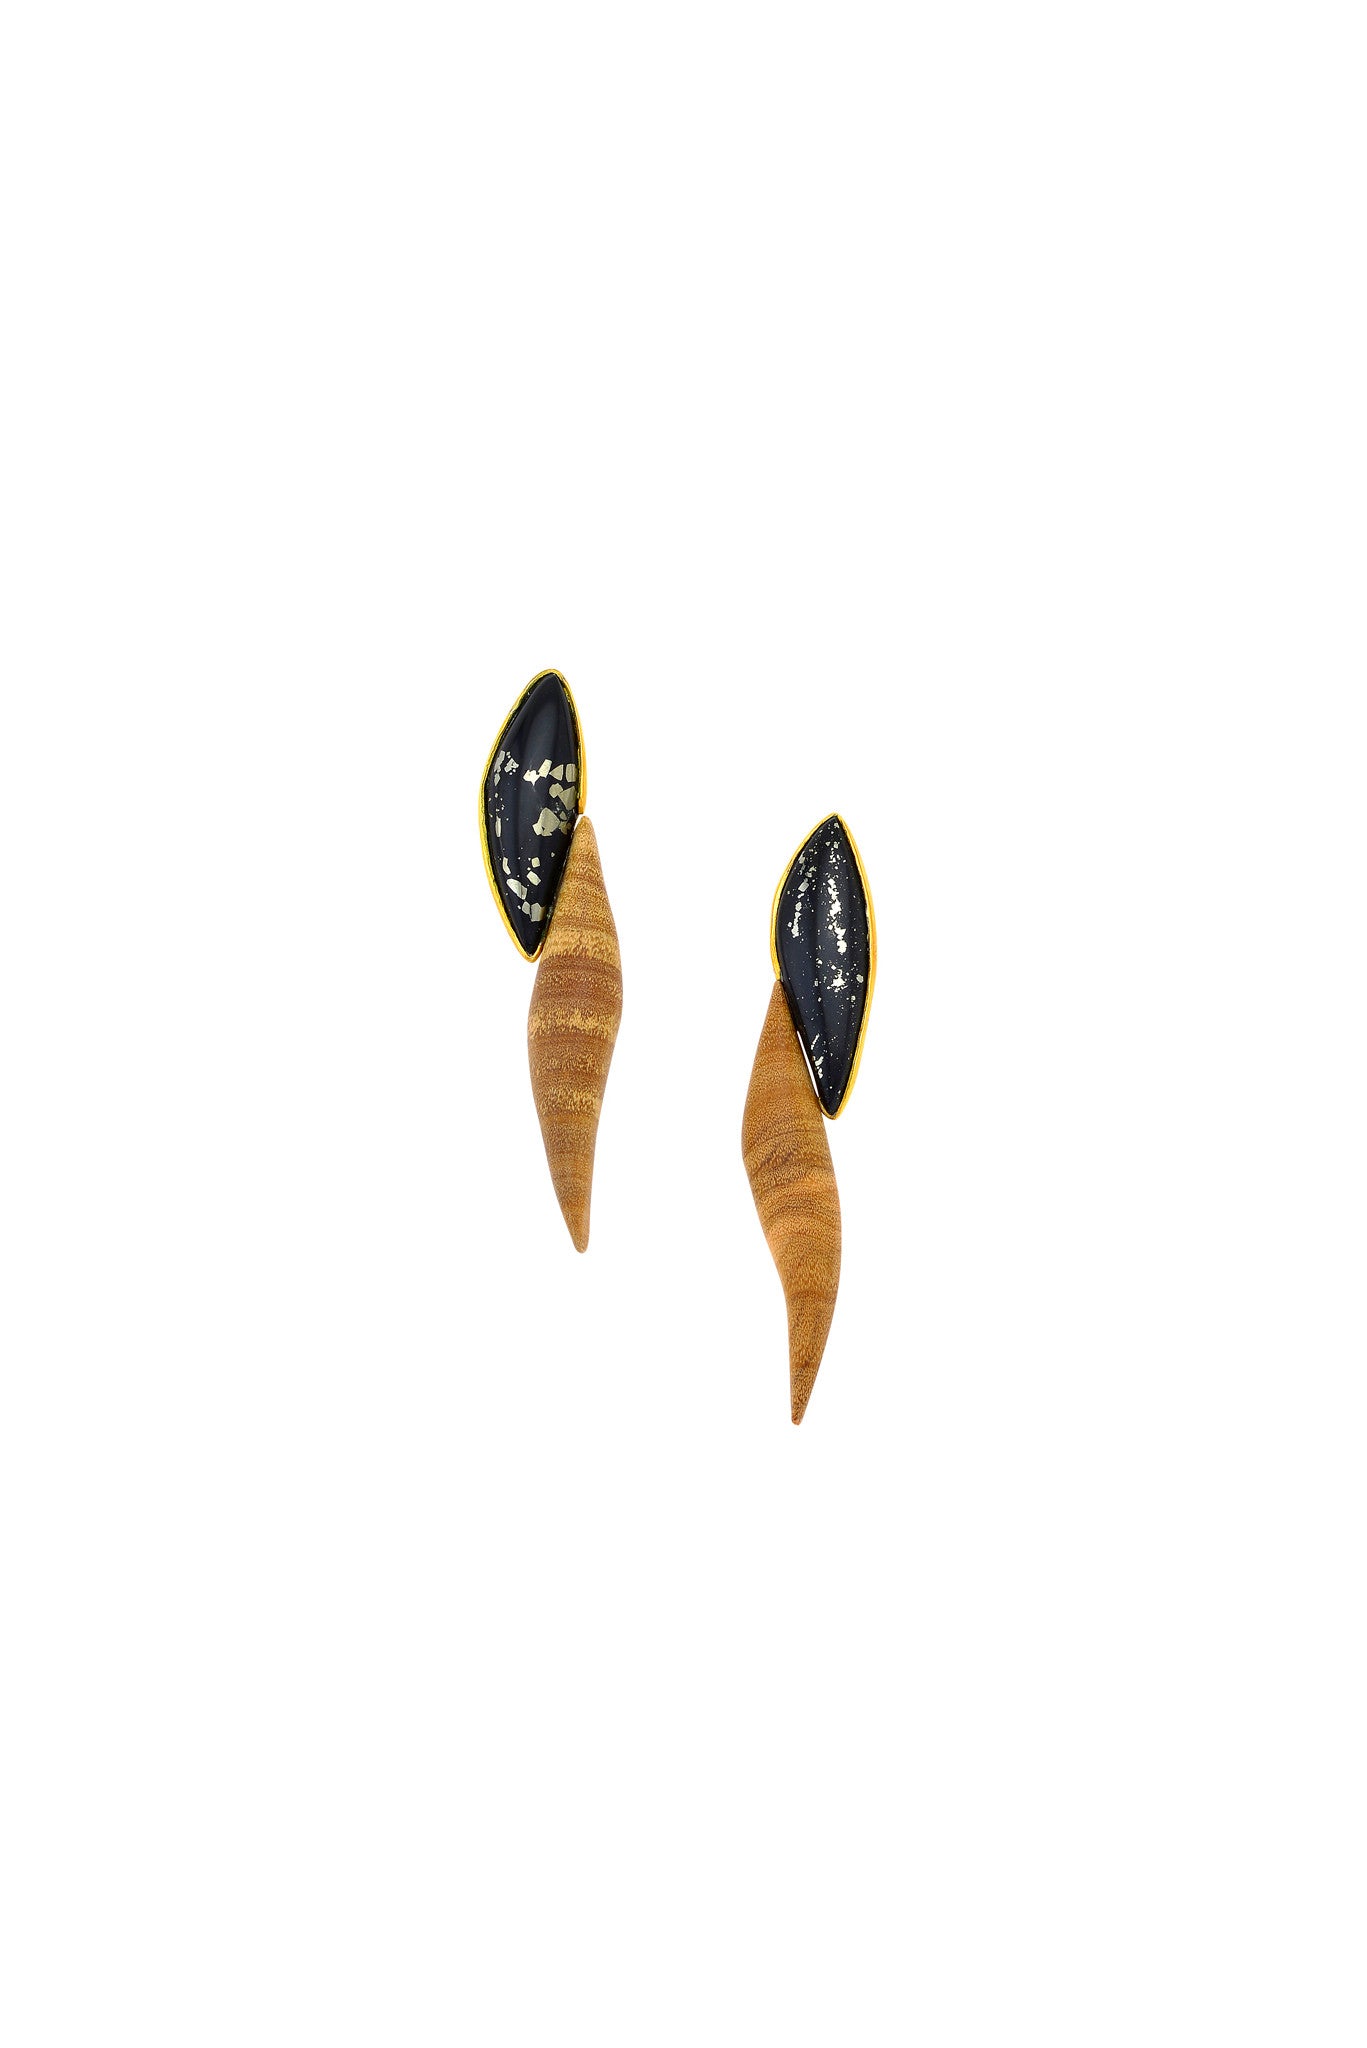 Enosis Small Olive Wood/ Stone Earrings